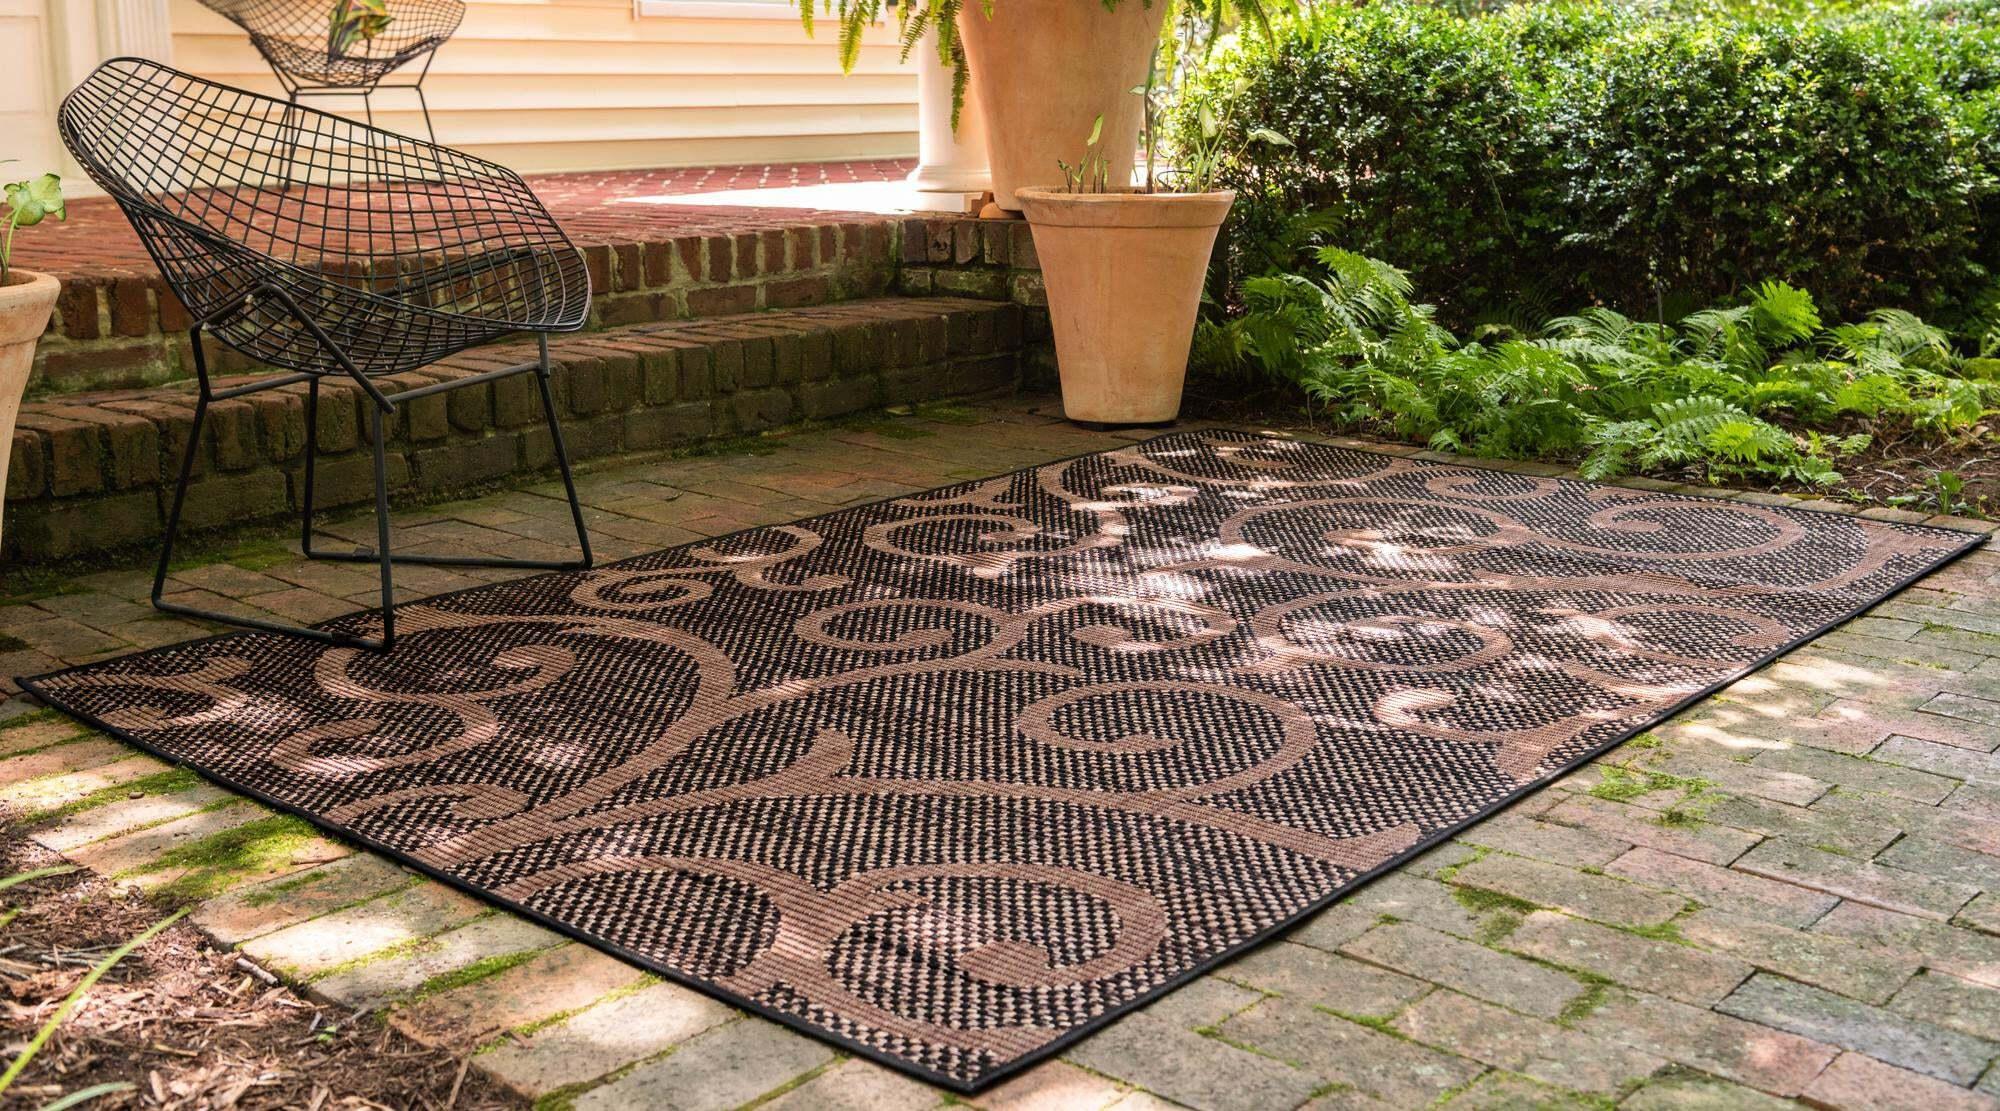 Unique Loom Outdoor Rugs - Outdoor Botanical Damask Rectangular 8x11 Rug Chocolate Brown & Black